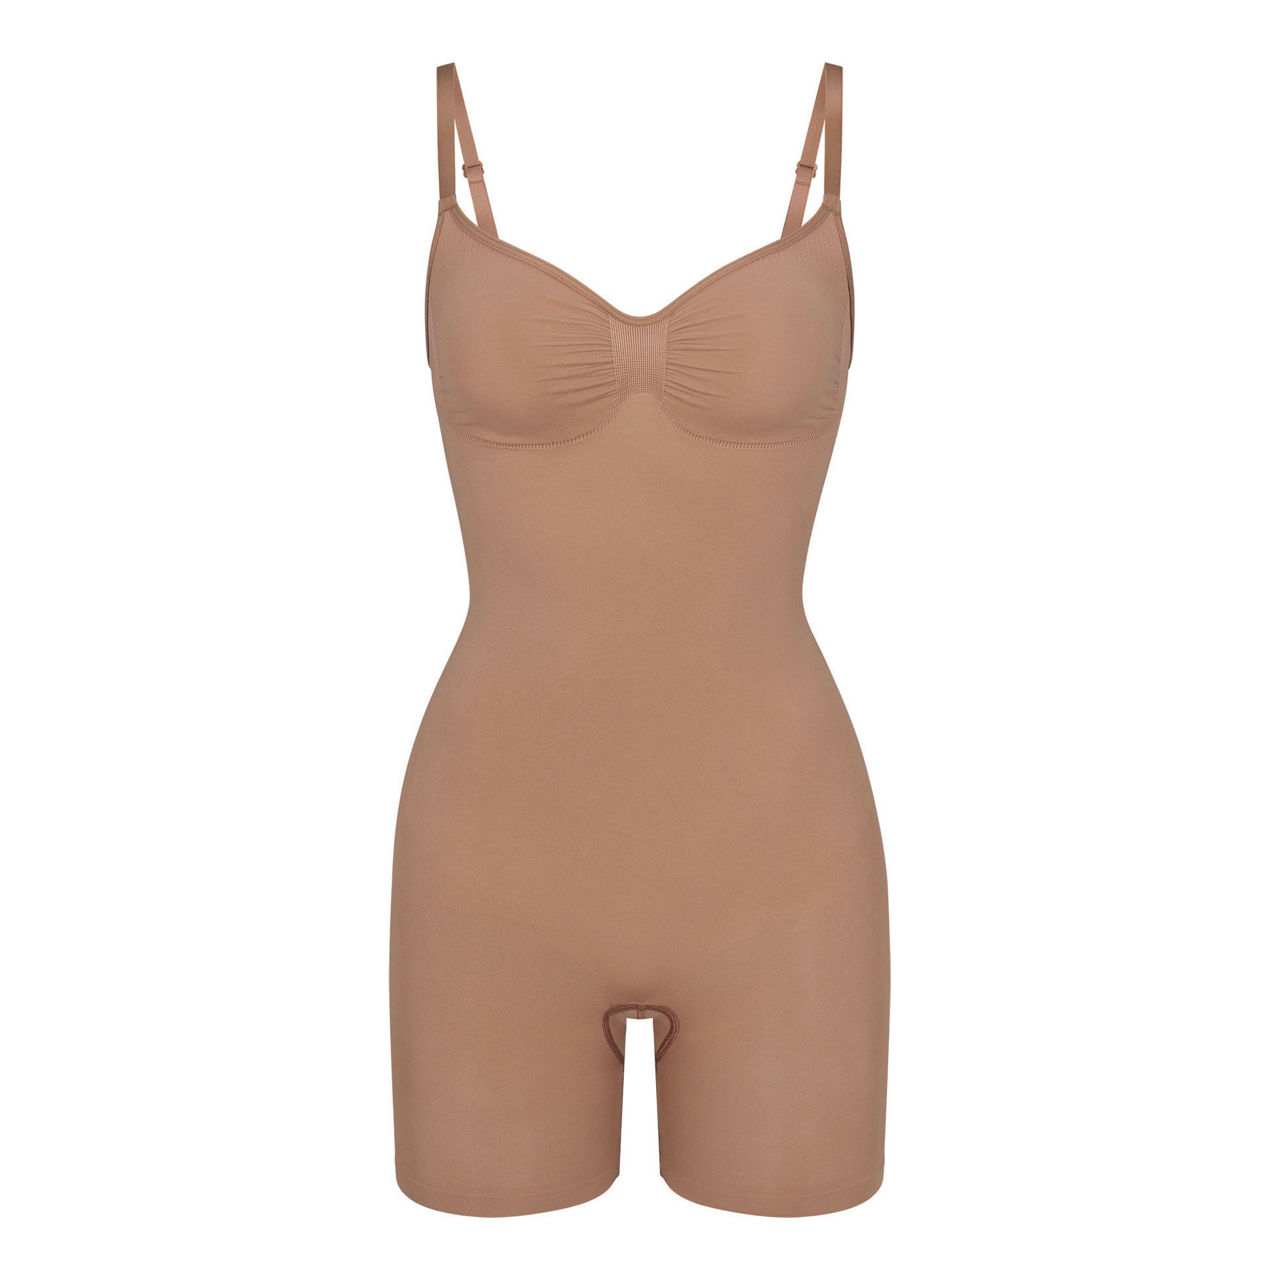 Skims Soft Smoothing Seamless Thong Bodysuit In Clay color size